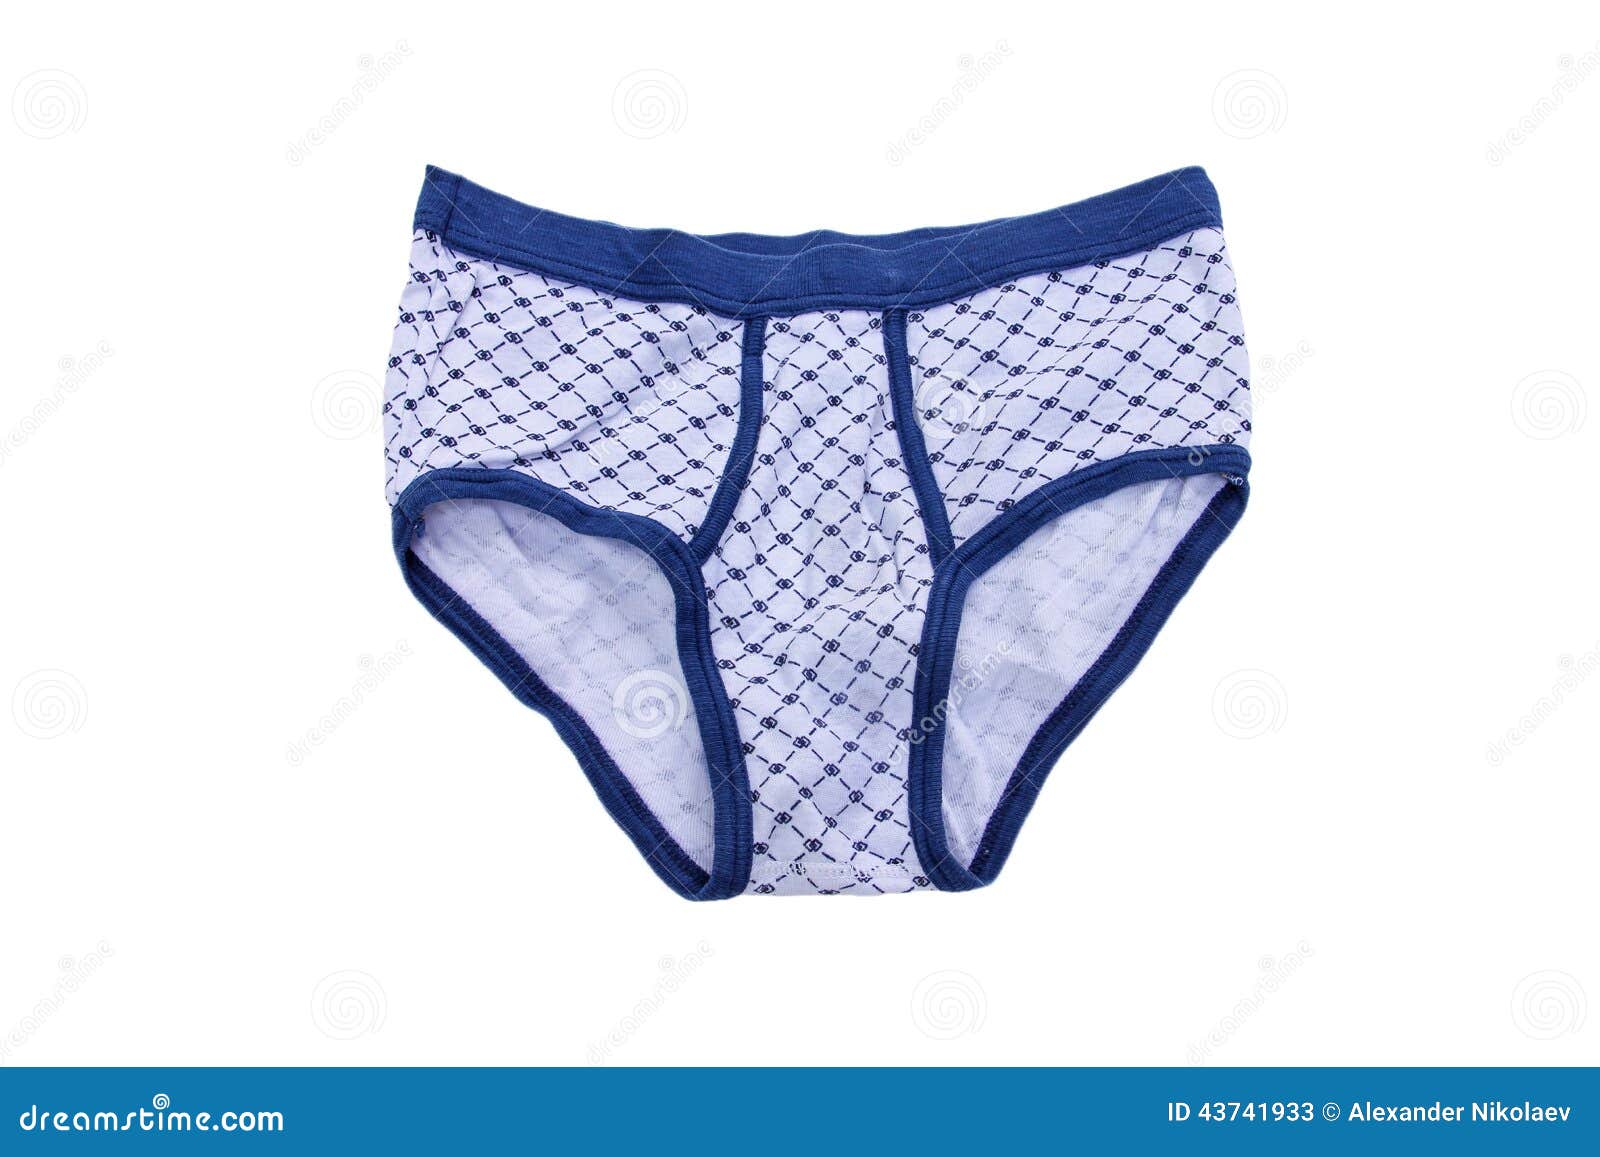 White-blue Men S Briefs Slips in a Cage Stock Image - Image of blue ...